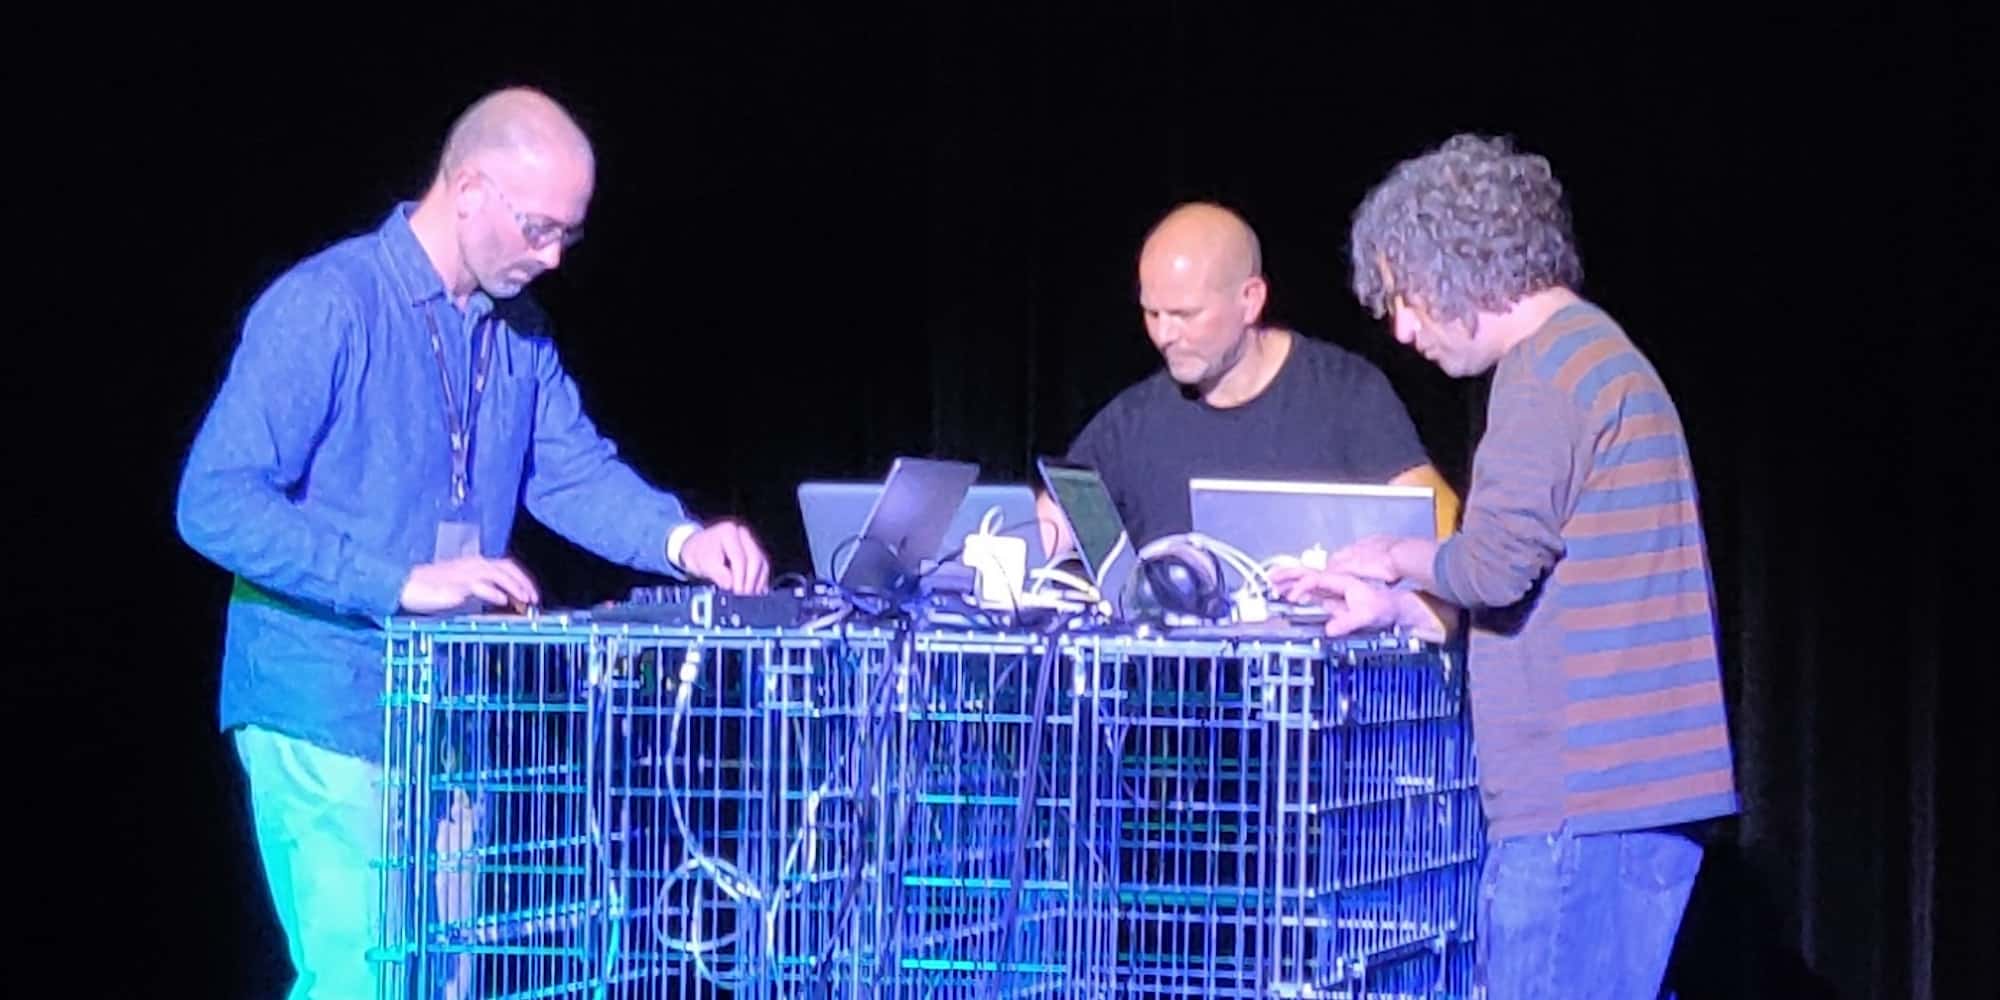 Image of performance by laptop trio 'Raw Green Rust'